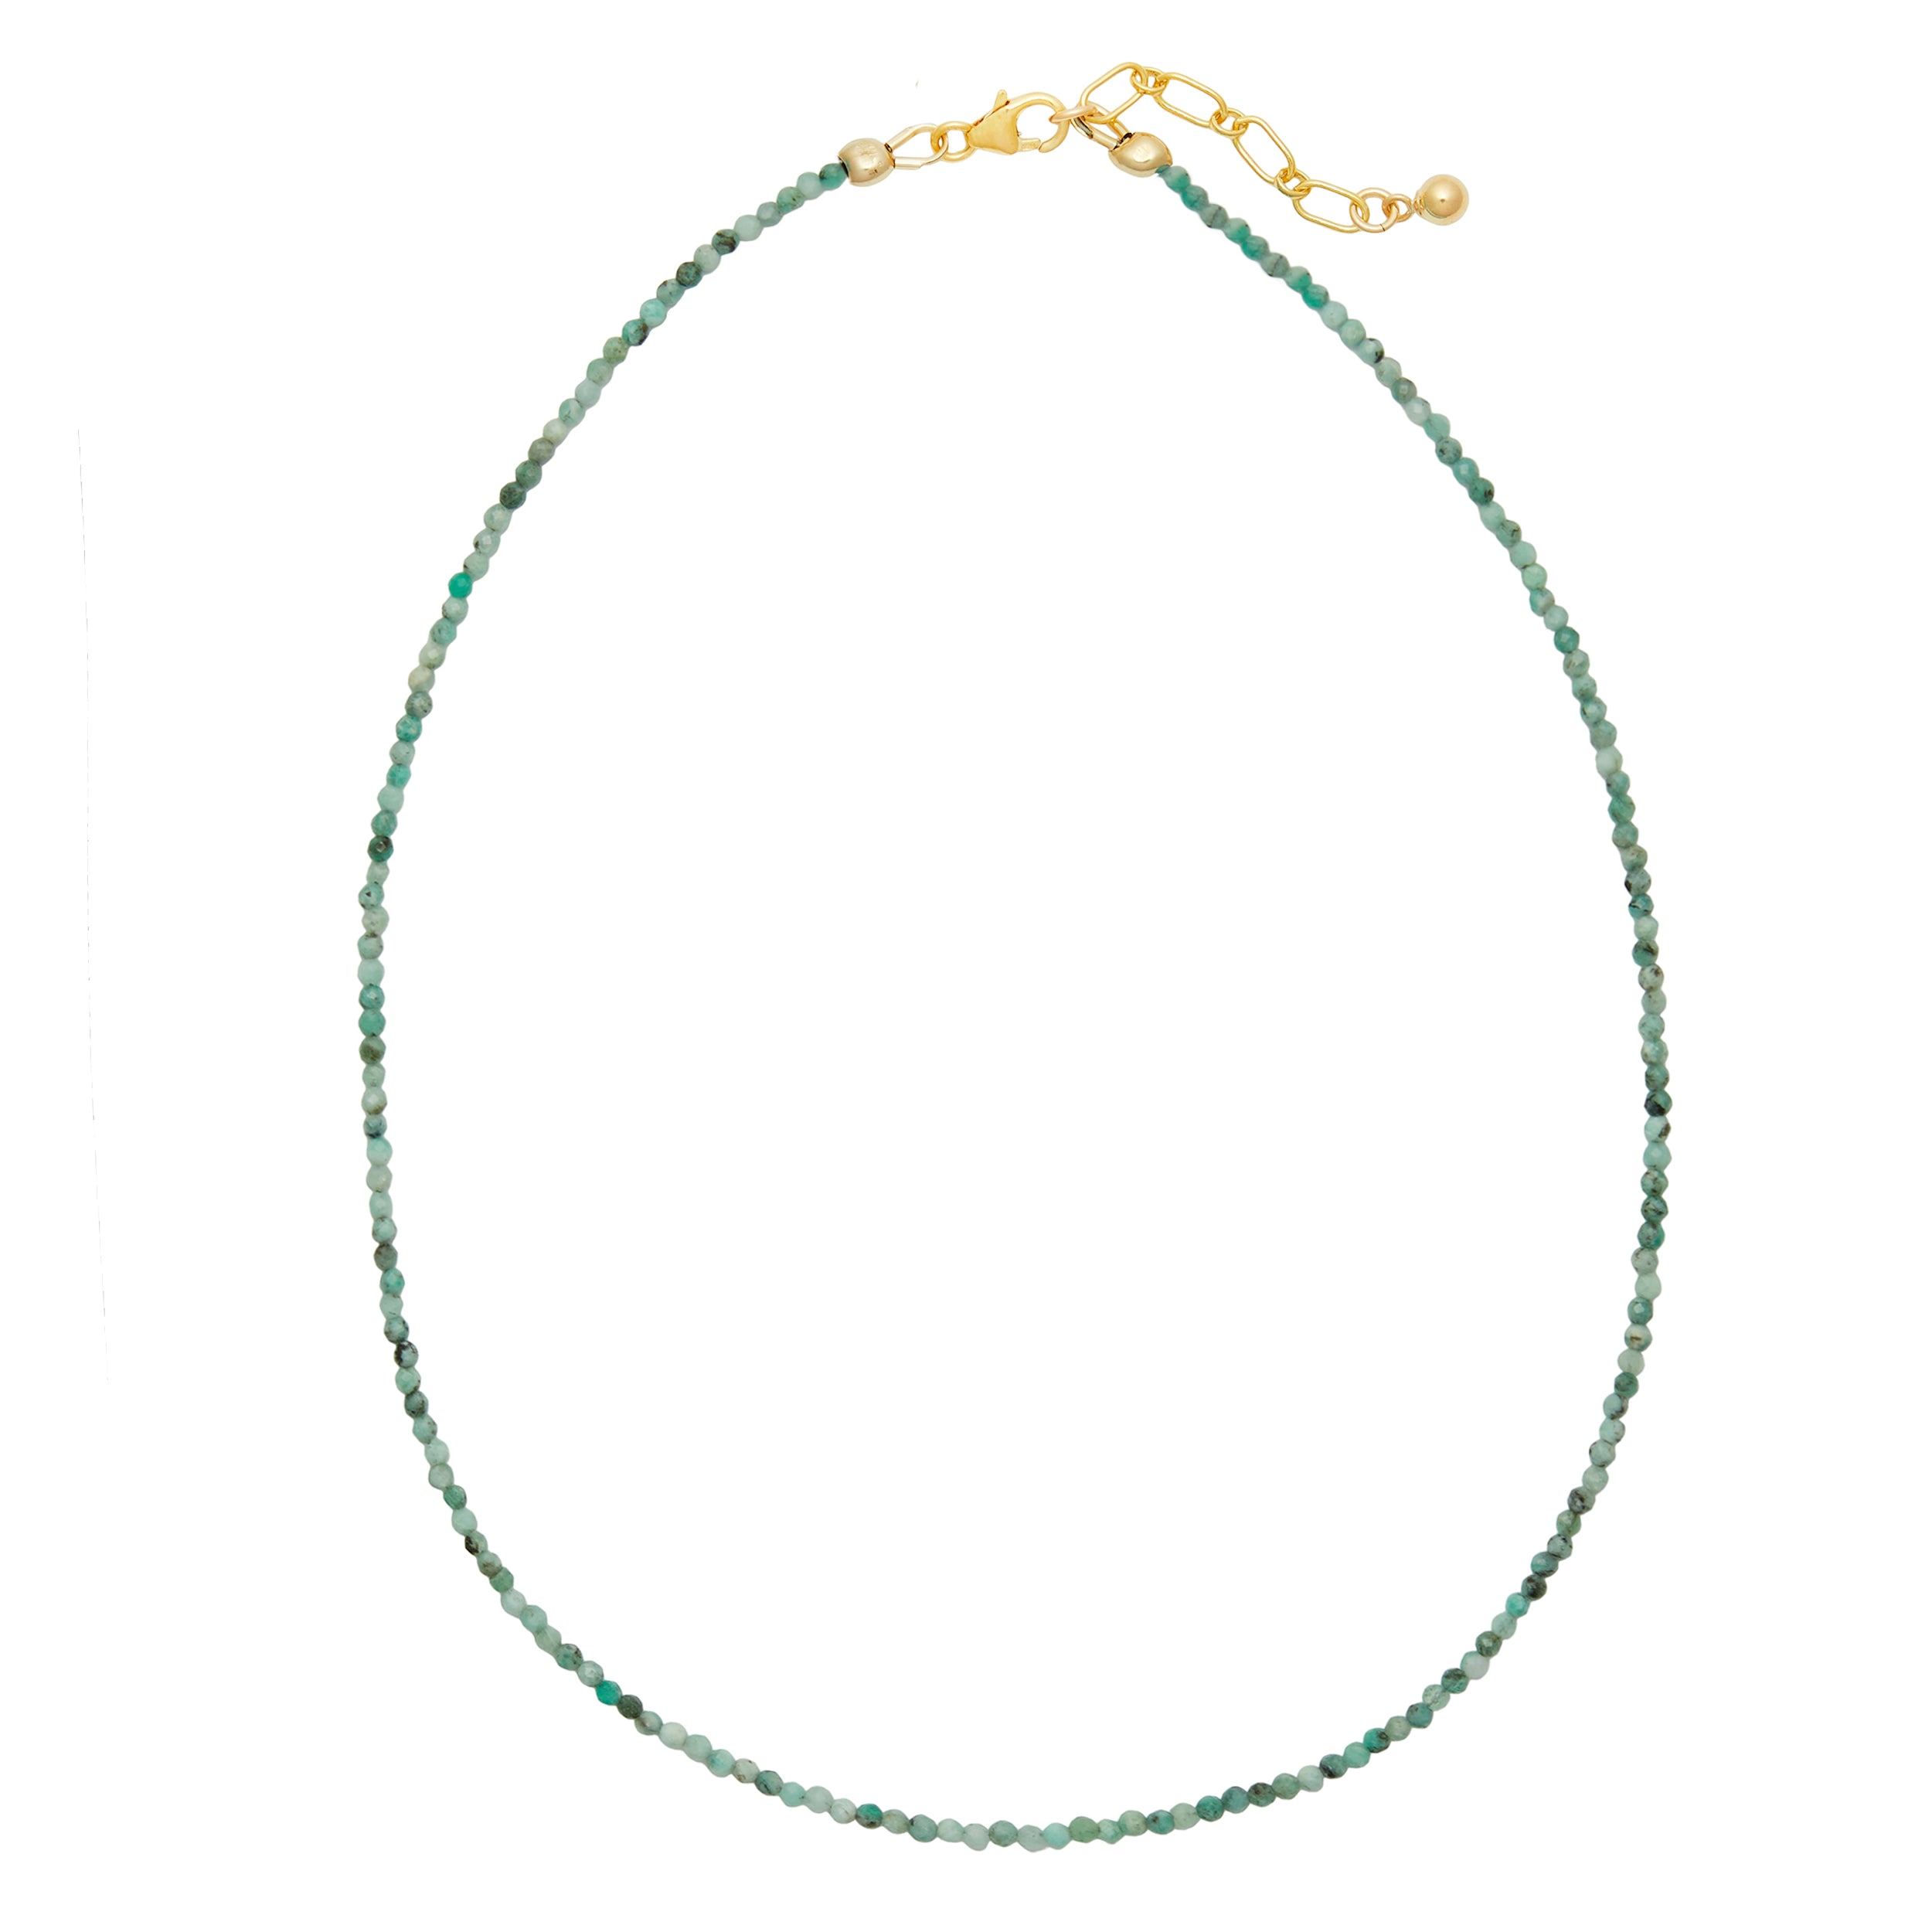 The Strand Necklace